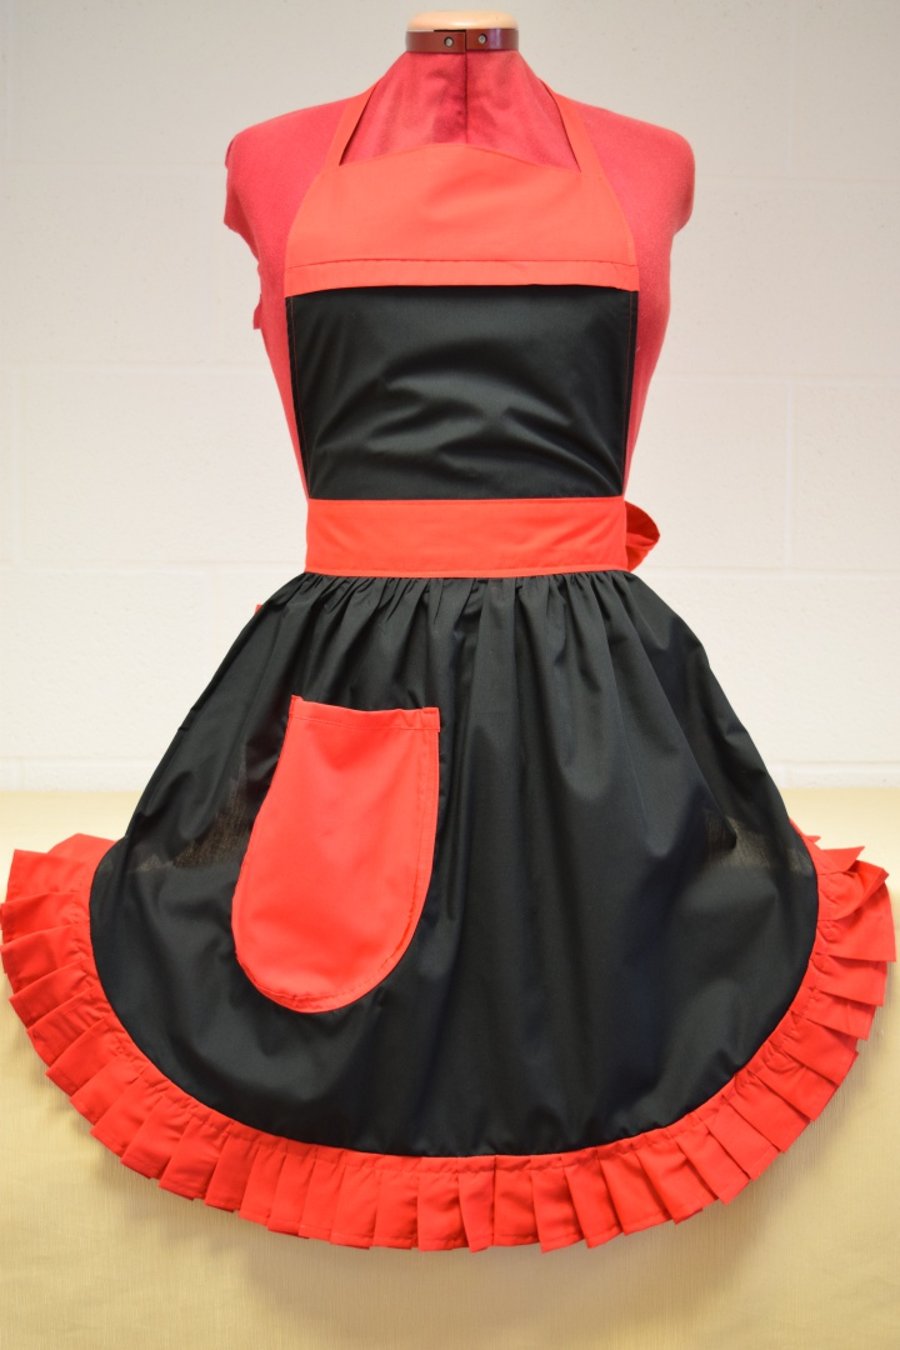 Vintage 50s Style Full Apron Pinny - Black with Red Trim